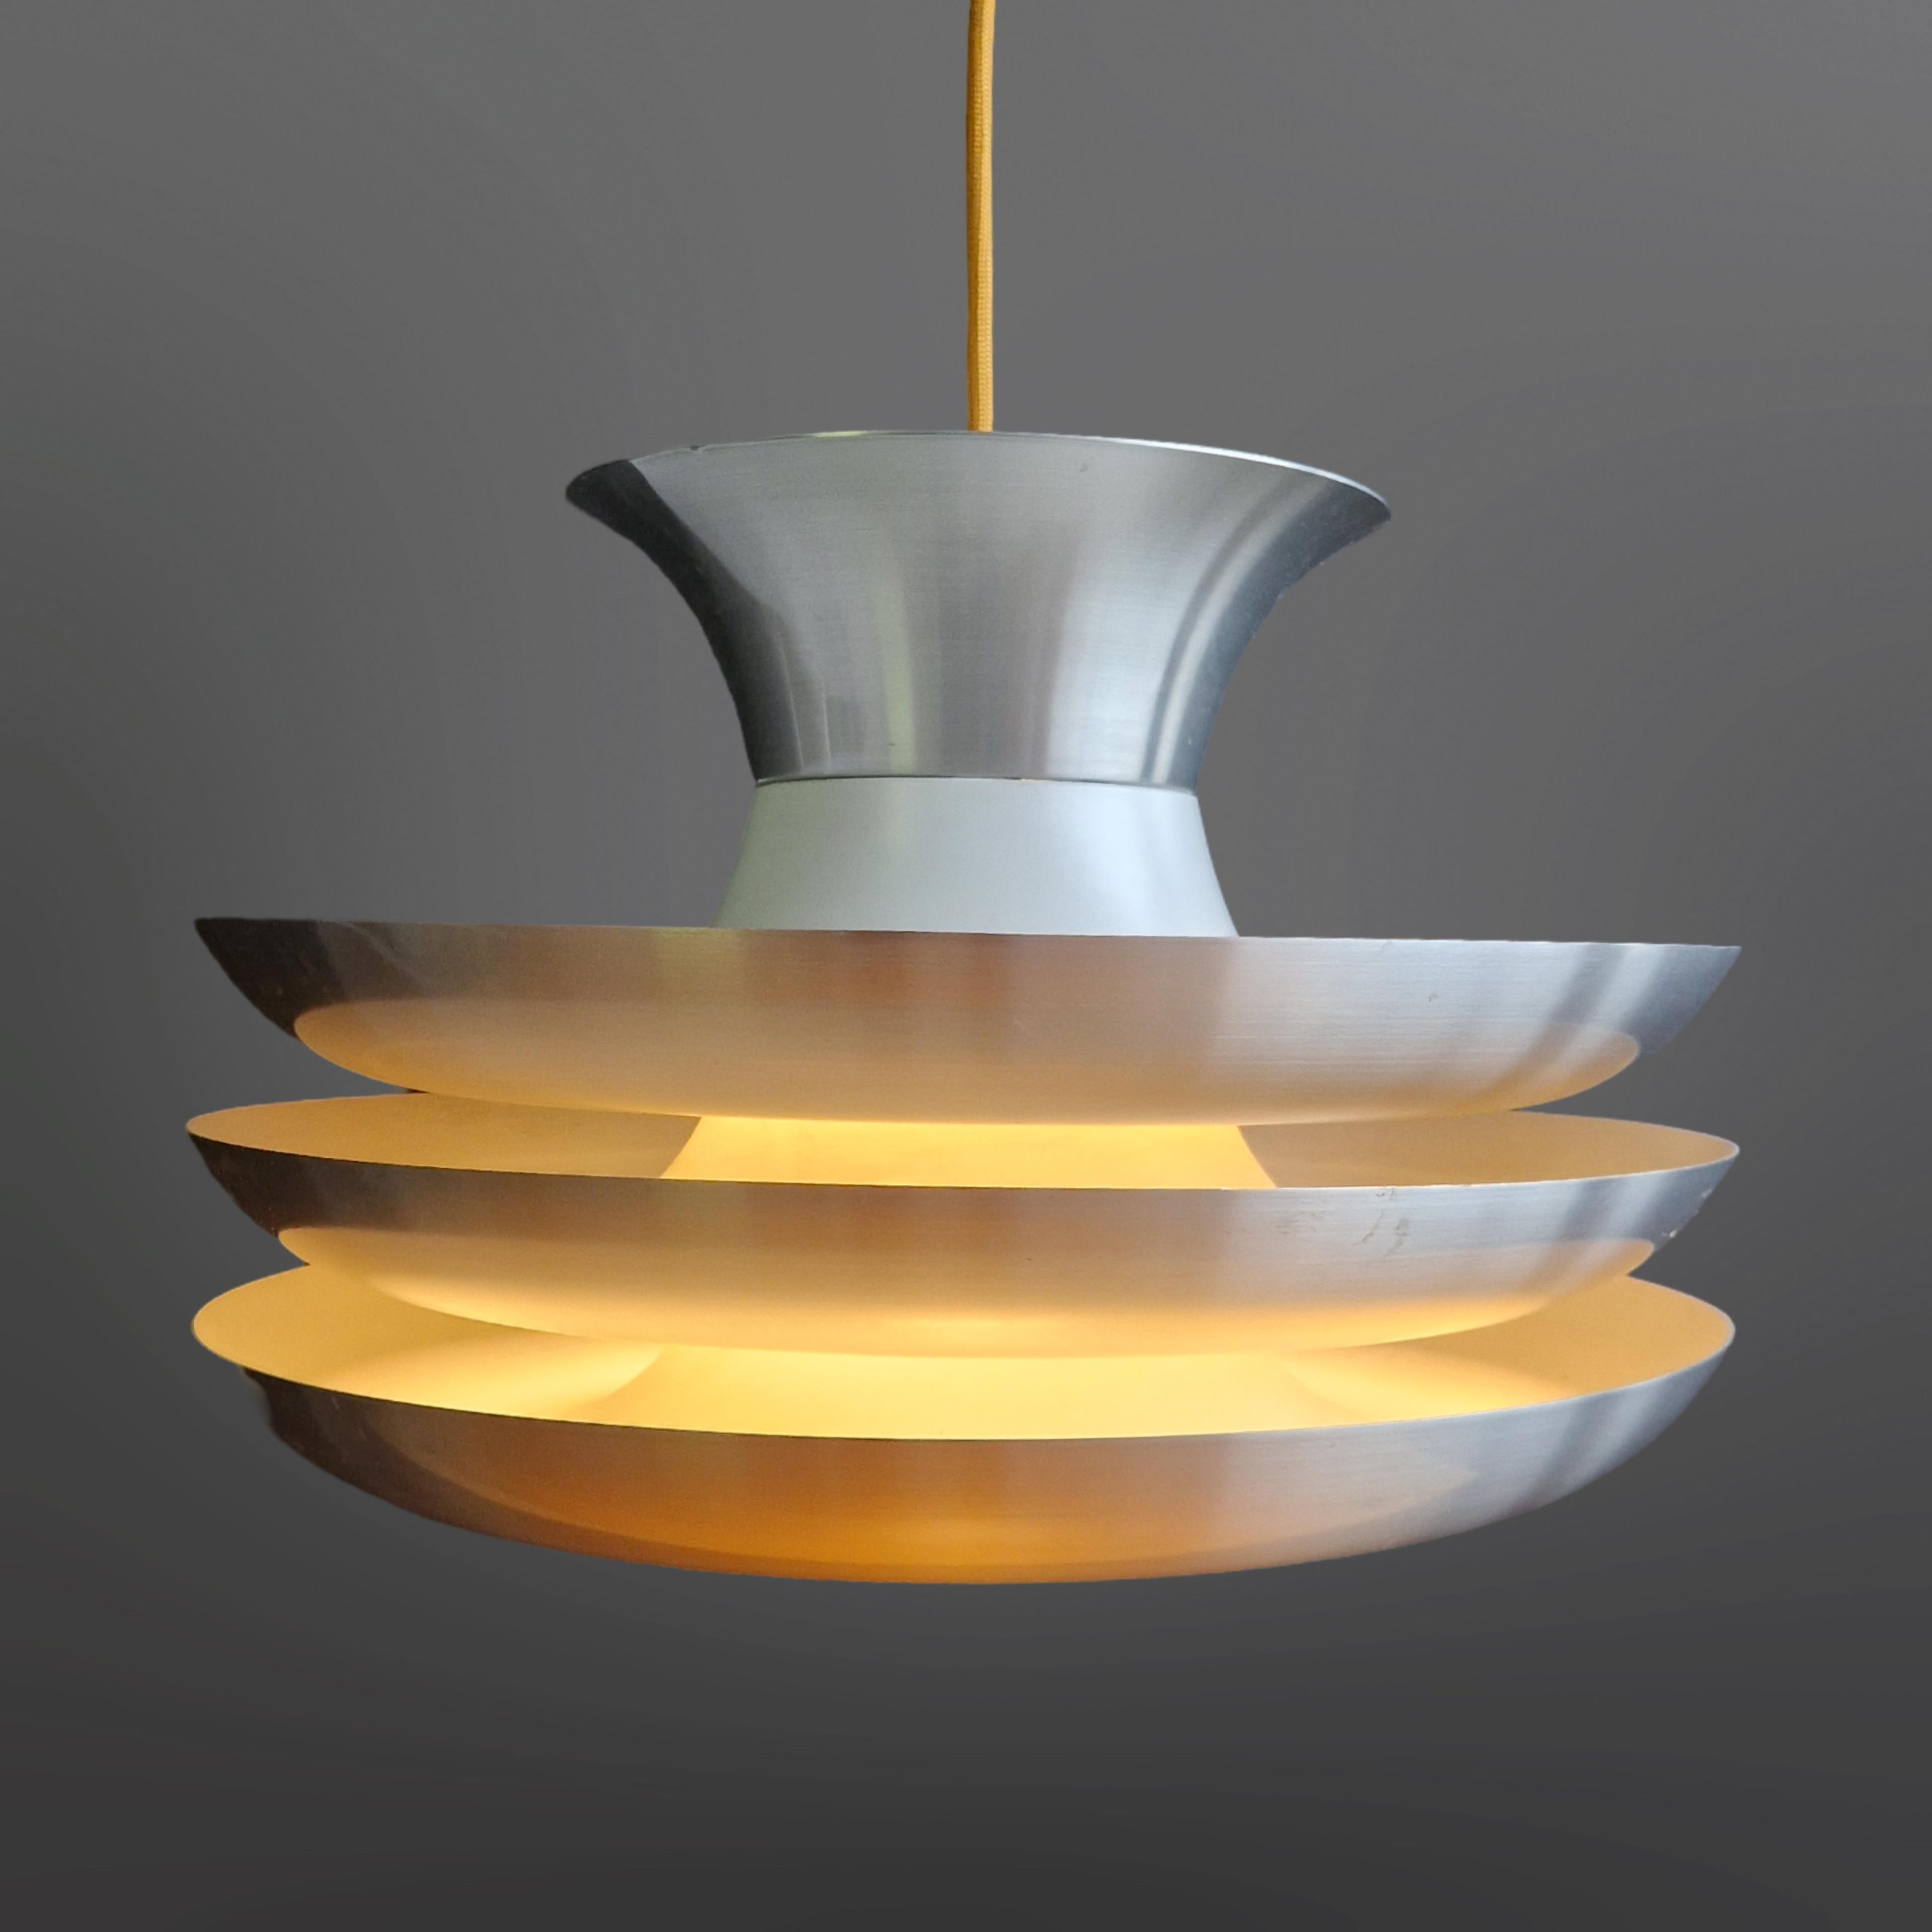 Stacked saucers pendant lamp. Made in the Netherlands in the 1960s. Made from aluminium. It has one central plug that holds a standard e27 bulb. Directional light from the centre and diffused light from the light that shines through the layers. 
The